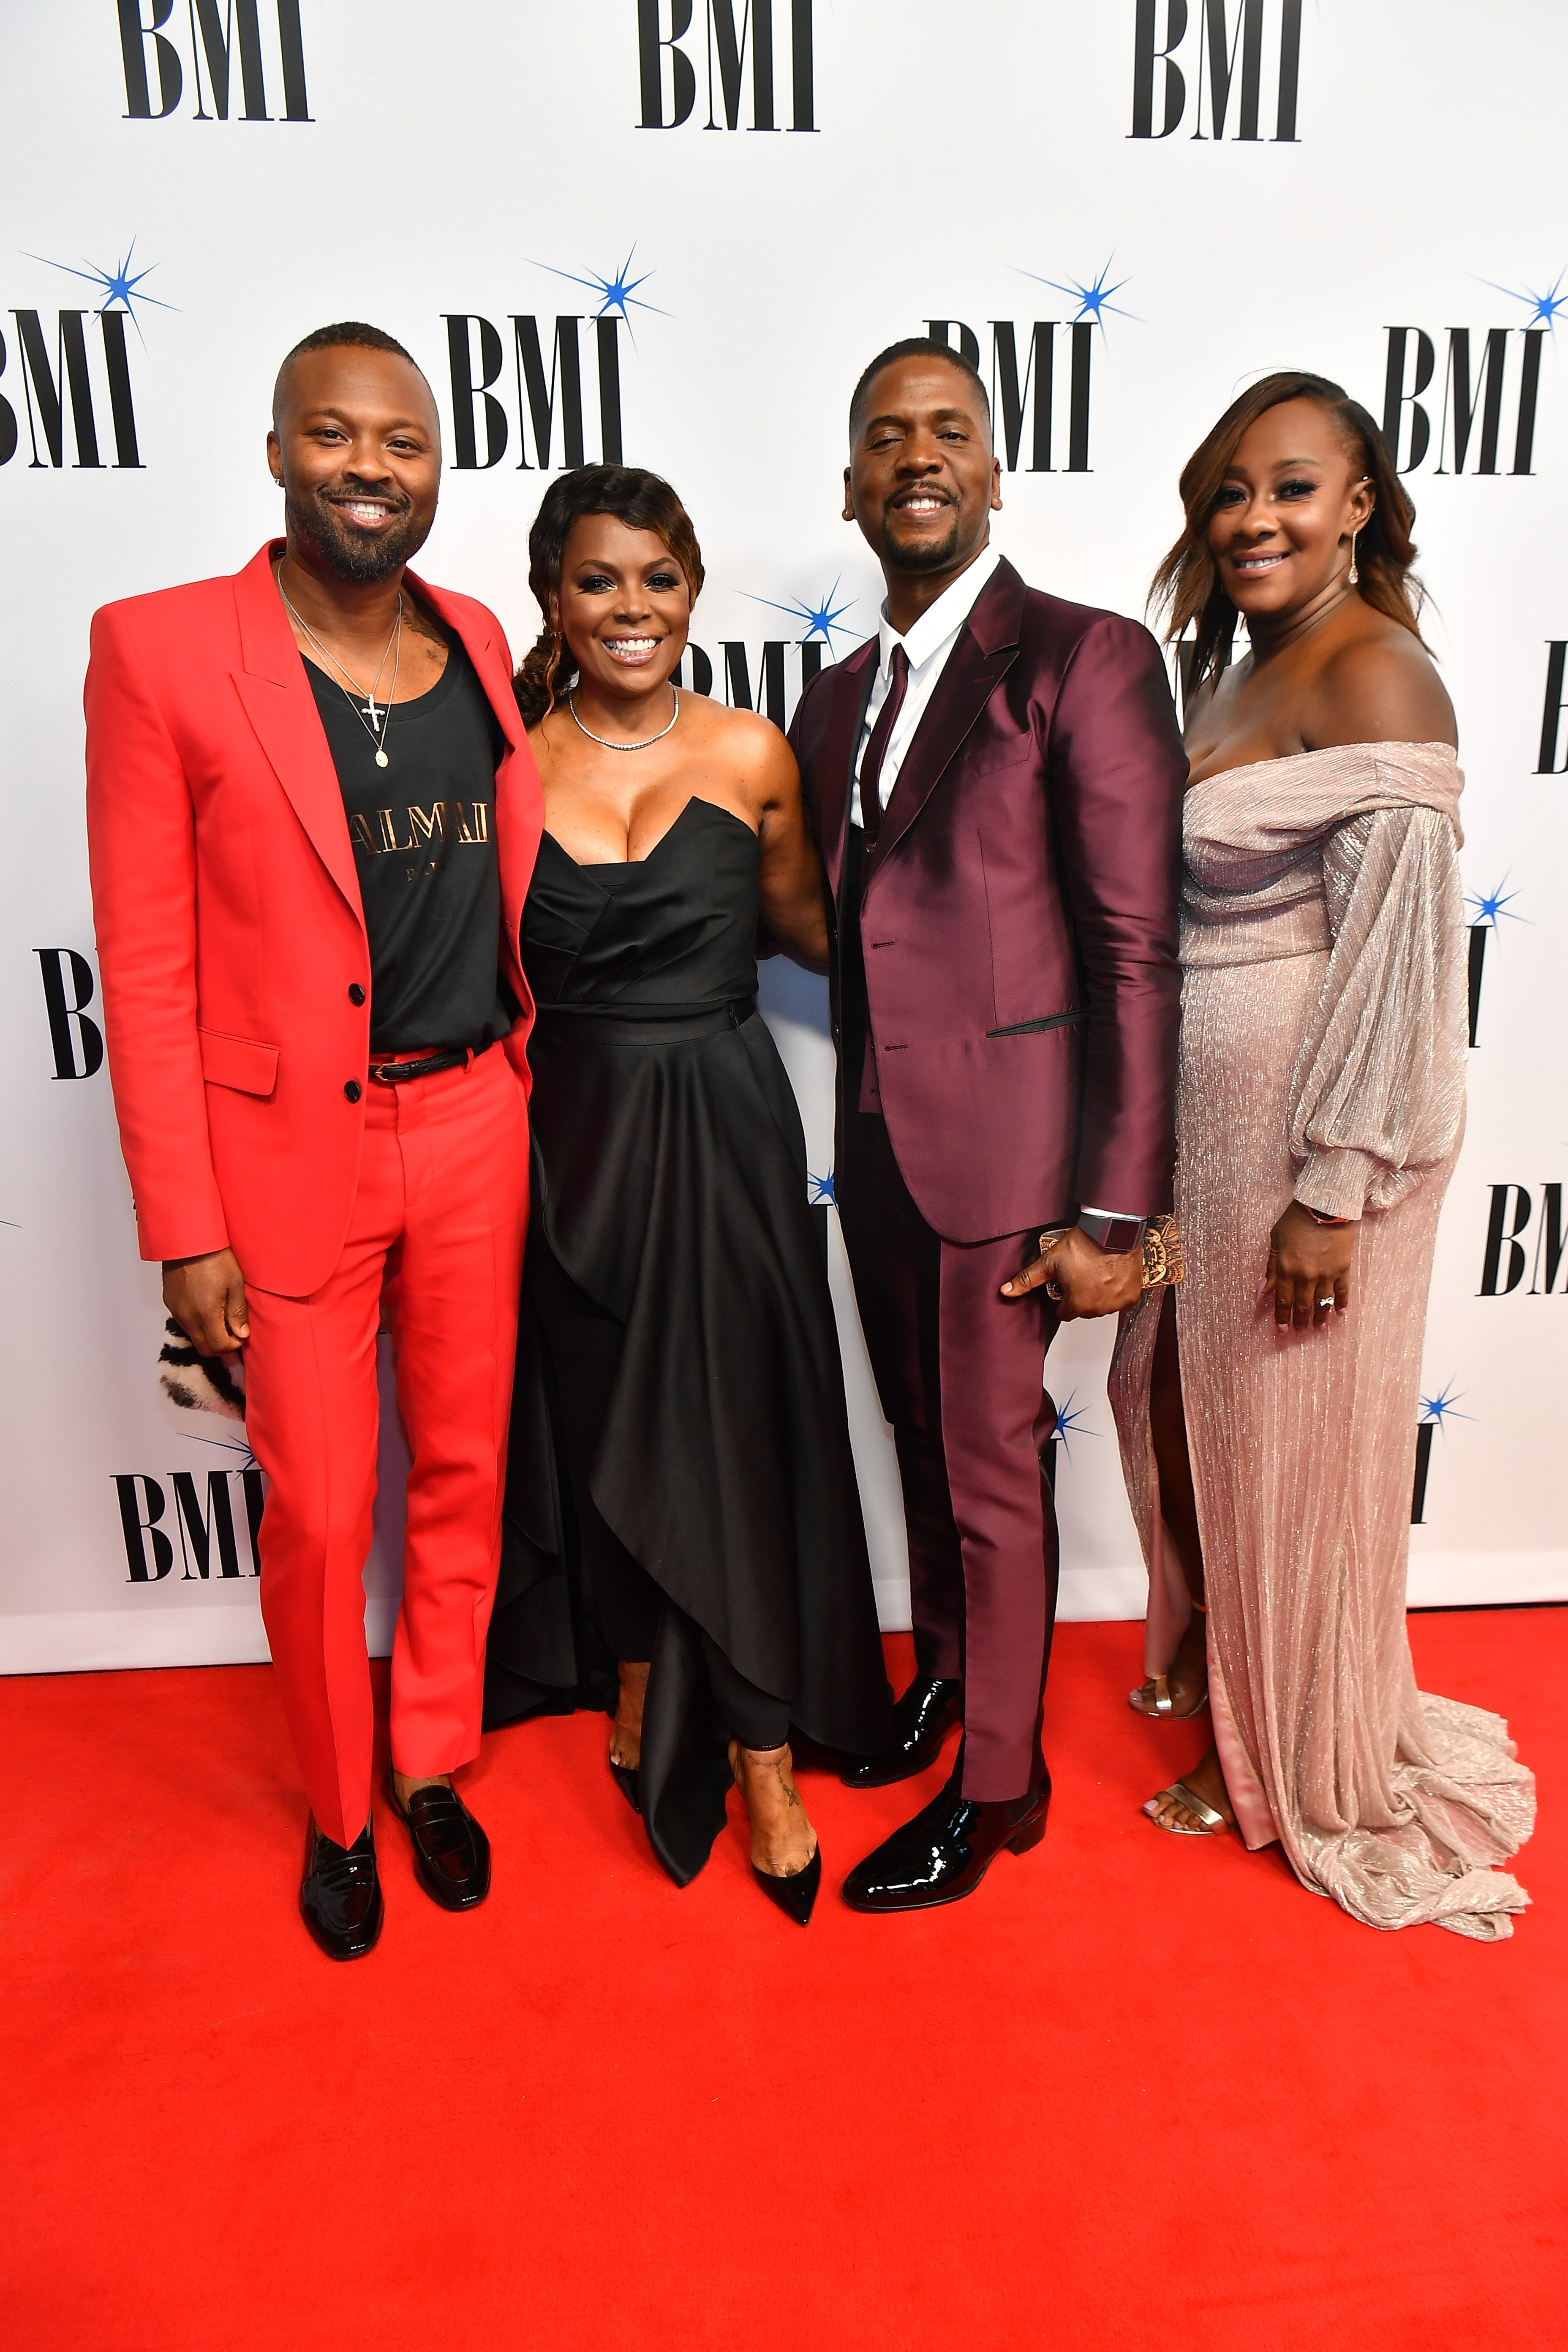 Brandy Honored With The Bmi President S Award At The 2019 Bmi R B